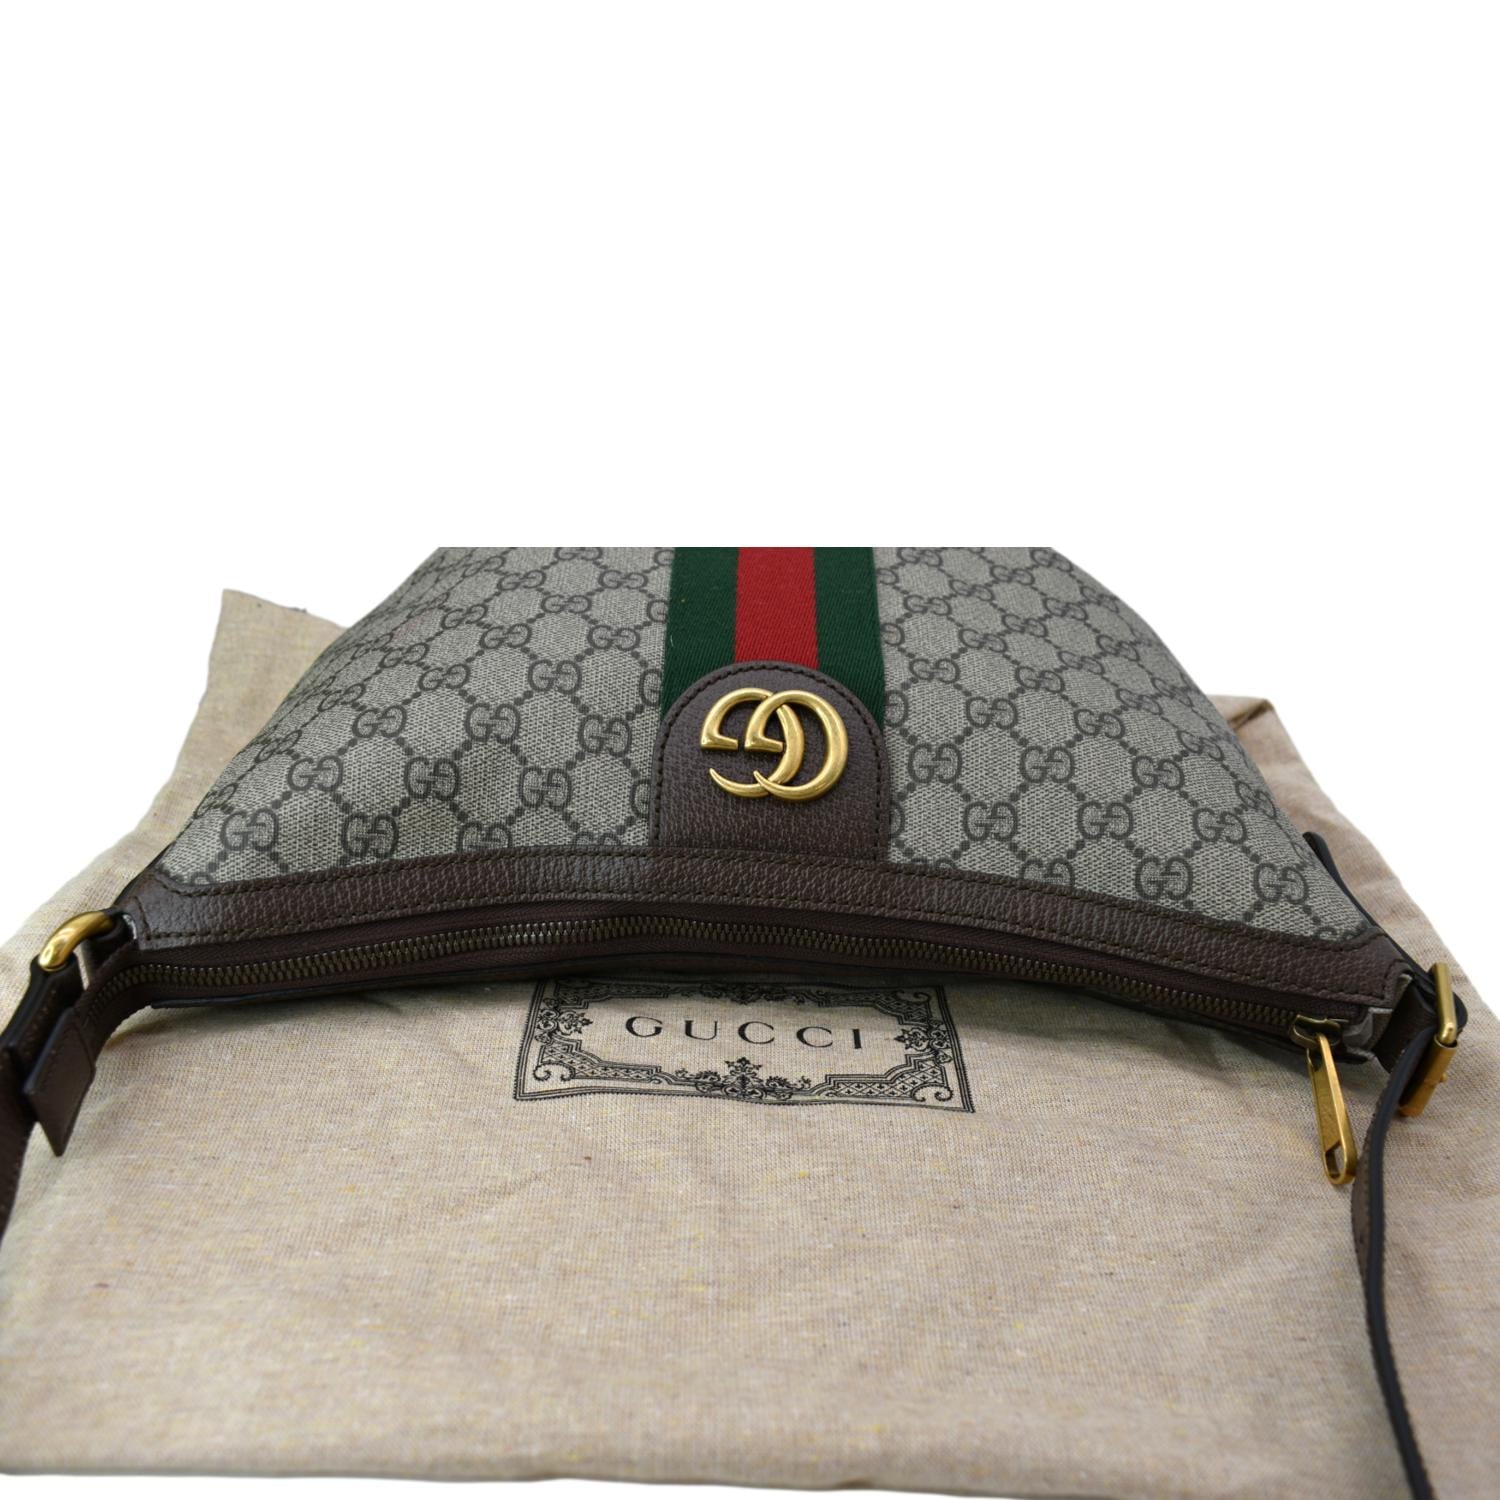 Gucci Ophidia GG Small Shoulder Bag, Beige, GG Canvas